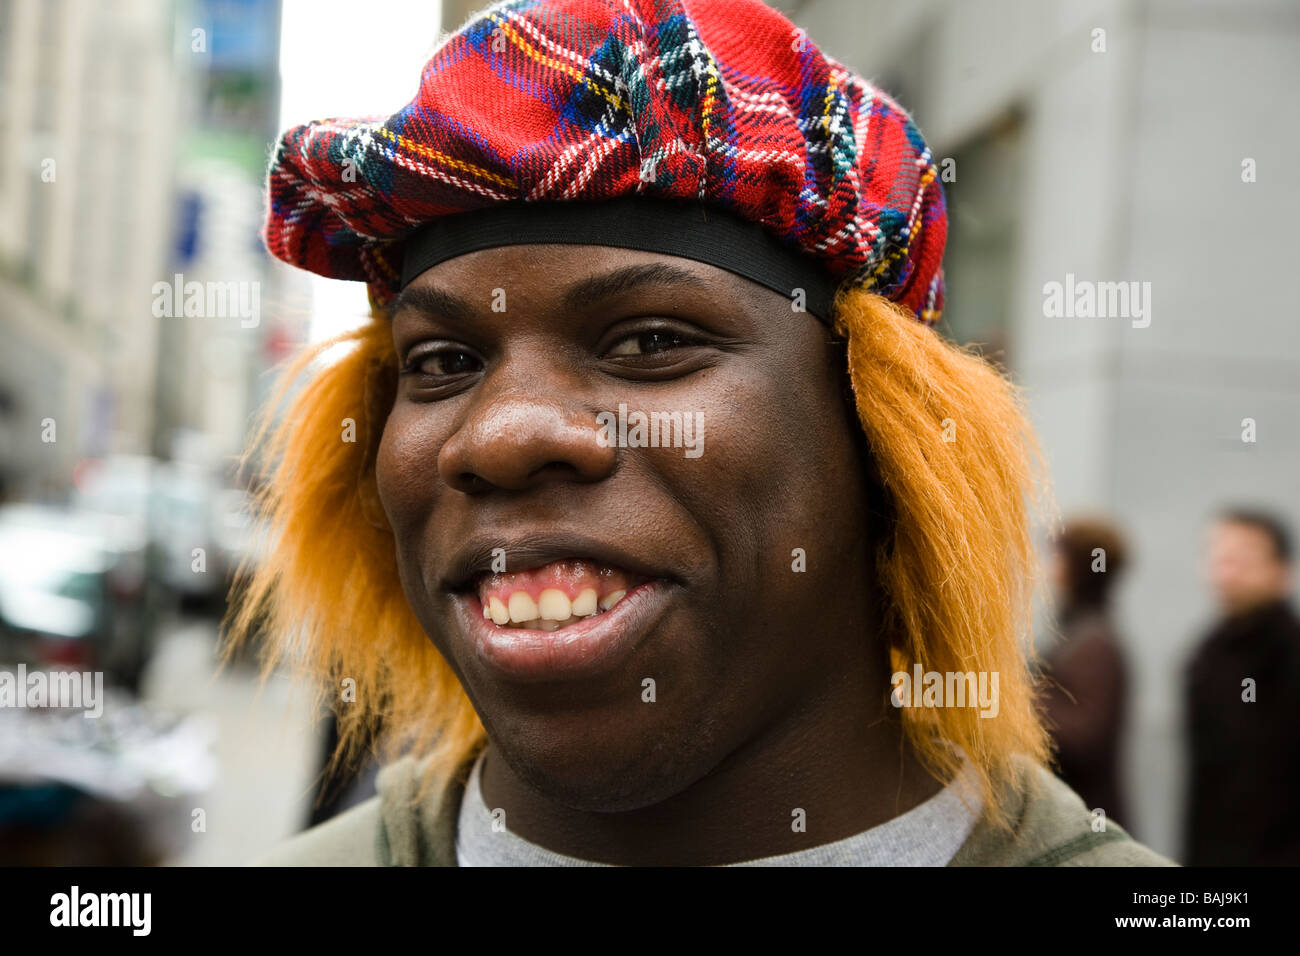 Man dressed with tartan hat and wig with red hair known as a see you Jimmy hat at the Tartan Day Parade in New York America Stock Photo